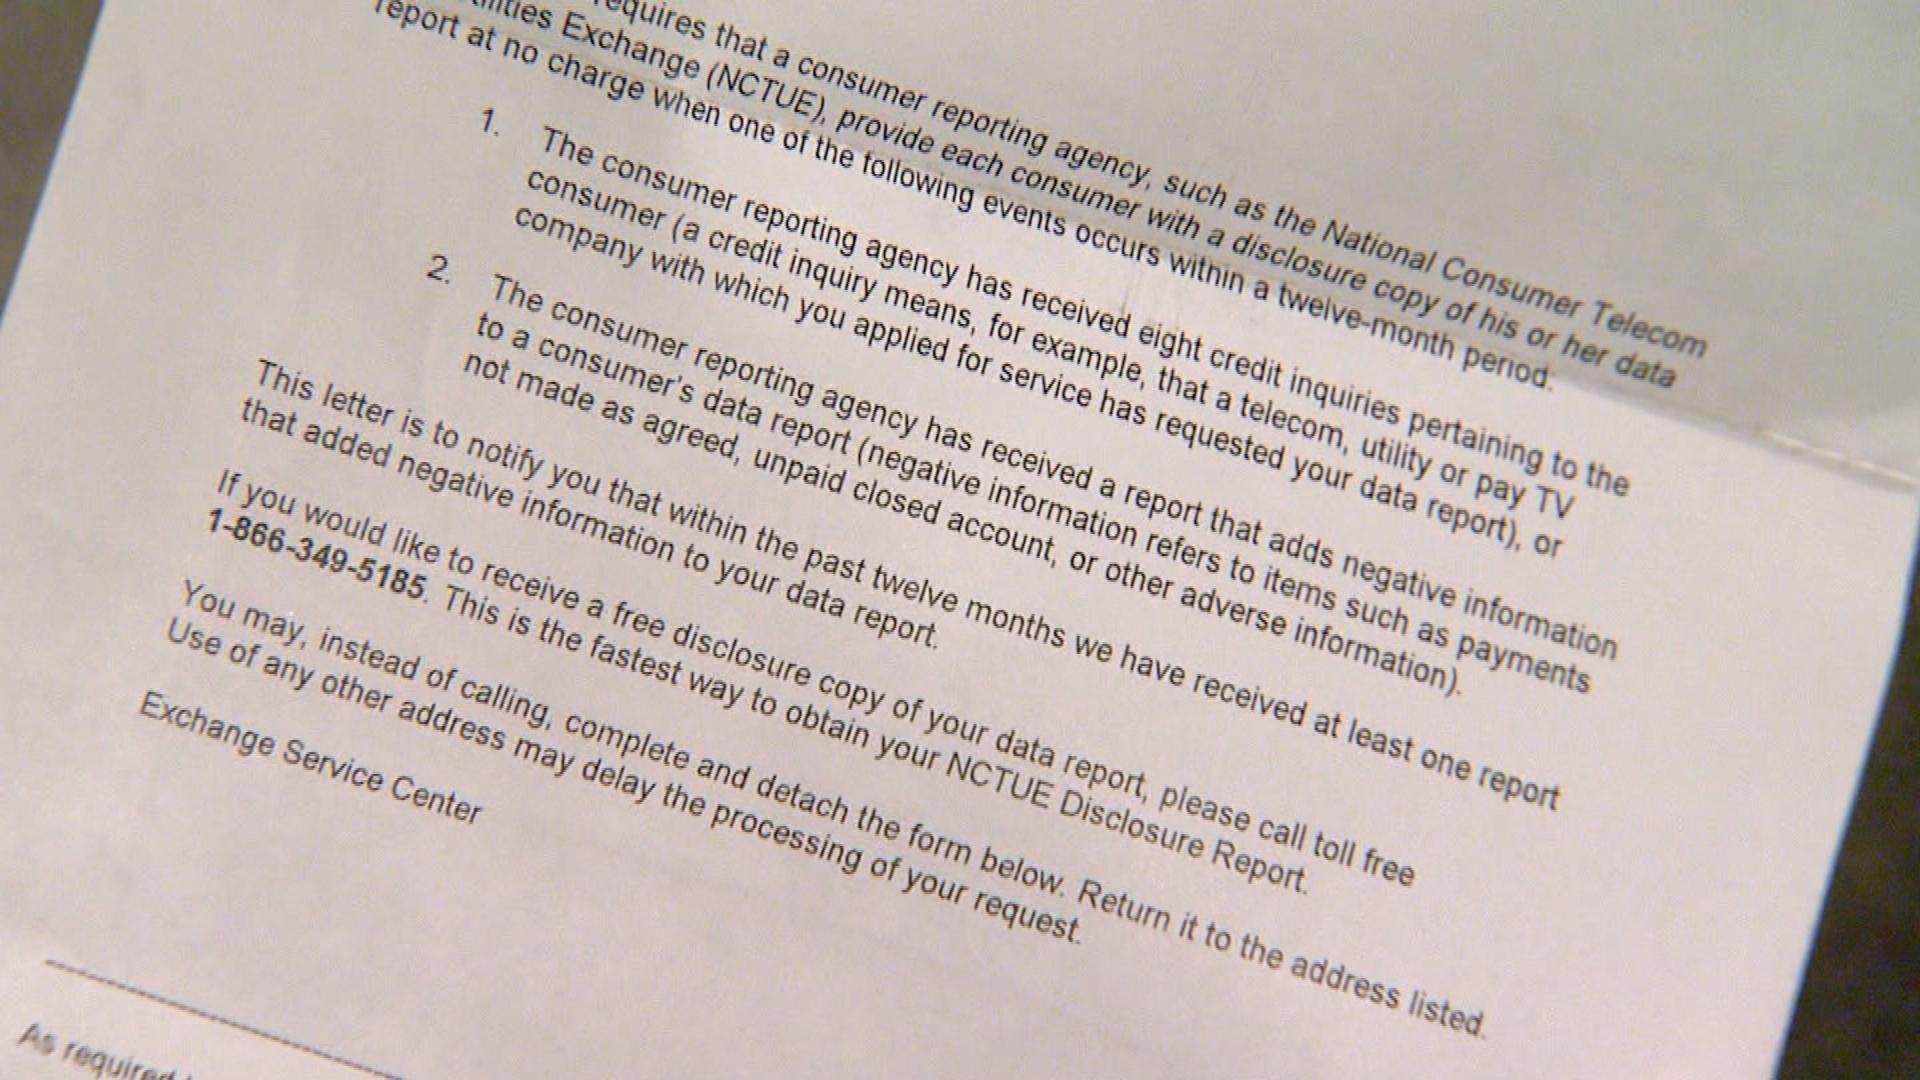 Letter Of Explanation For Credit Inquiries Sample from denver.cbslocal.com